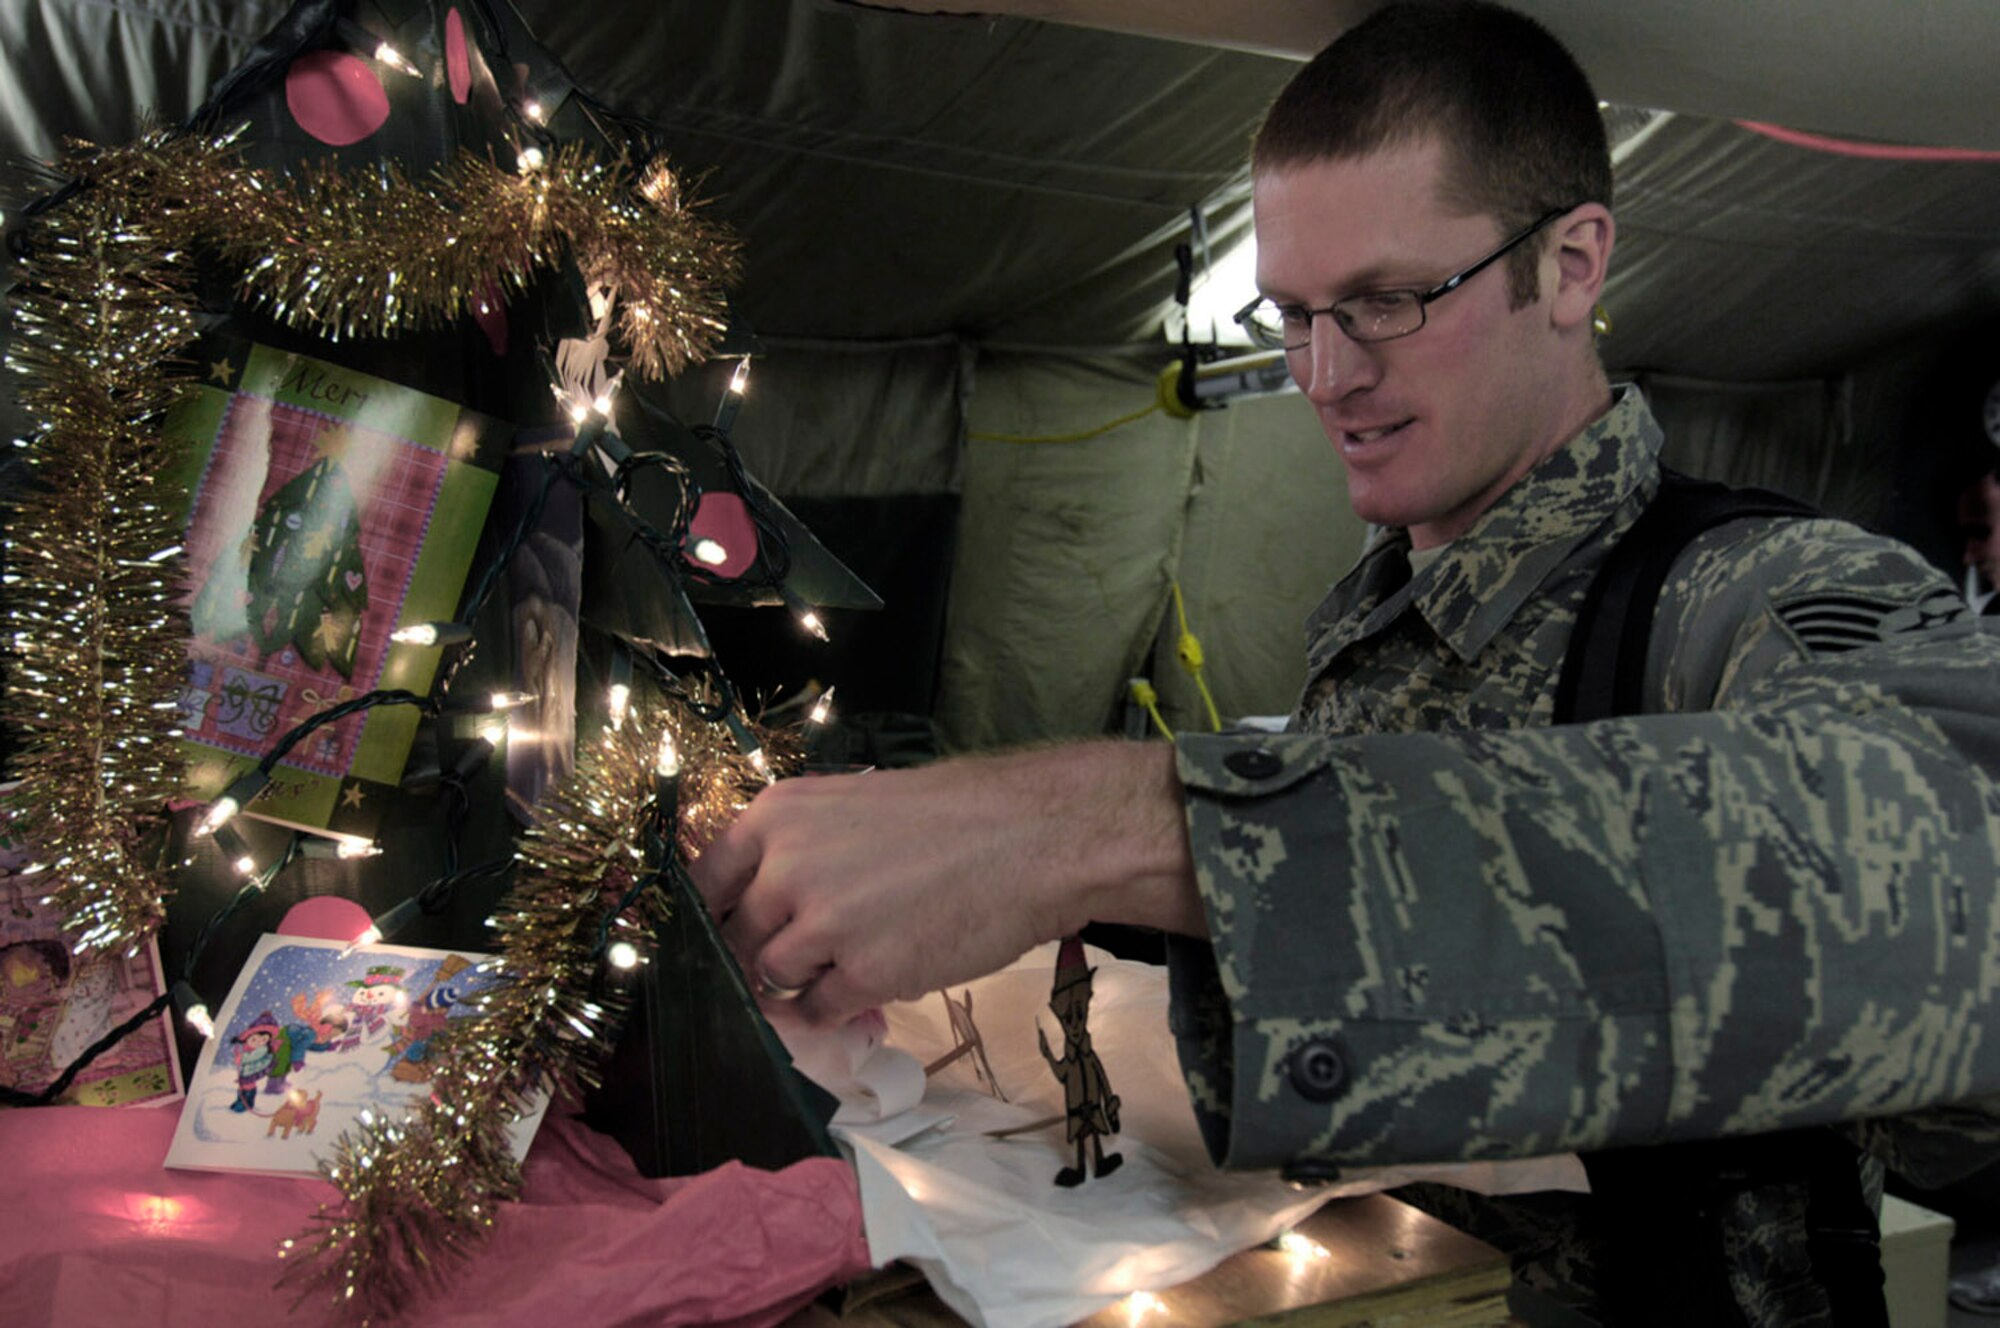 Tech. Sgt. Ryan McMaster places figures for a holiday diorama next to a tree that he created with locally-procured materials Dec. 14 at Bagram Air Base, Afghanistan. Sergeant McMaster is an aircrew life support technician with the 774th Expeditionary Airlift Squadron. (U.S. Air Force photo/Staff Sgt. Joshua T. Jasper)